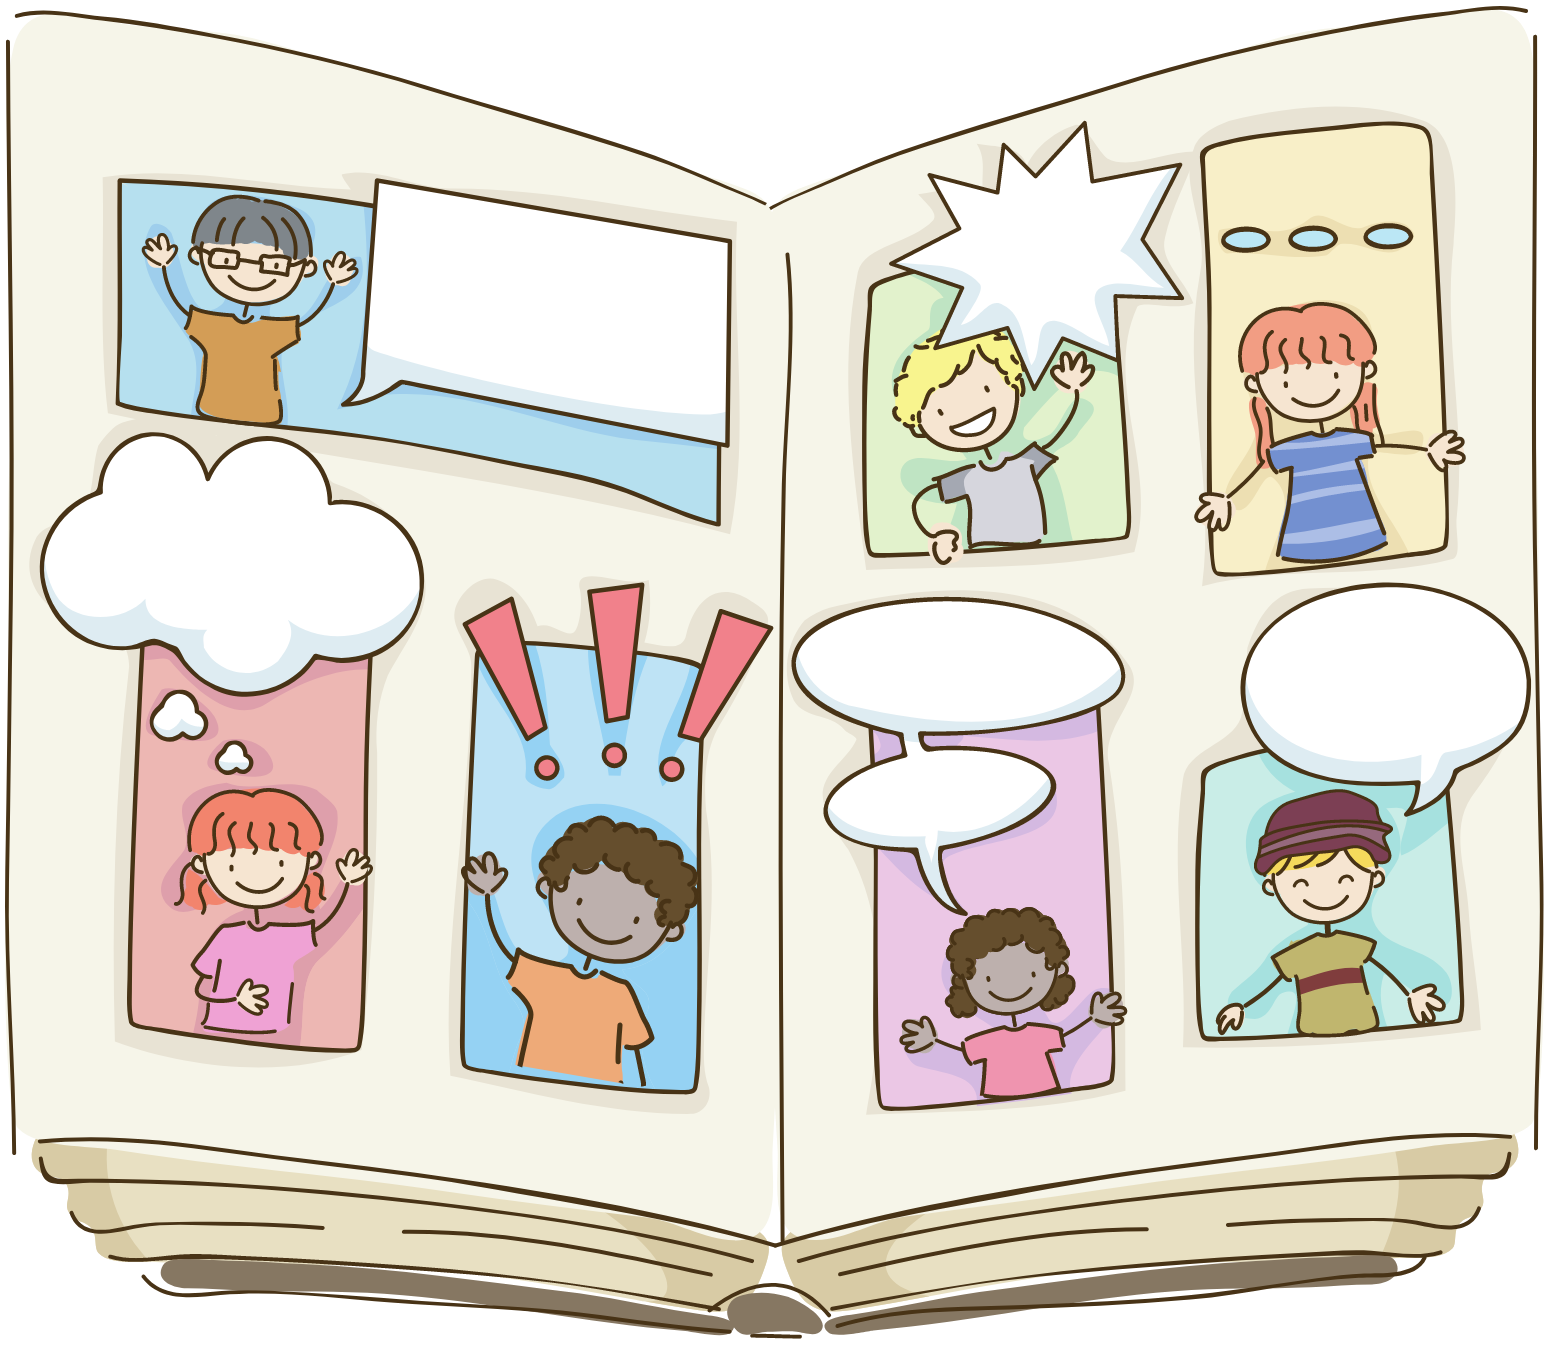 A book with colourful comic panels depicting people.